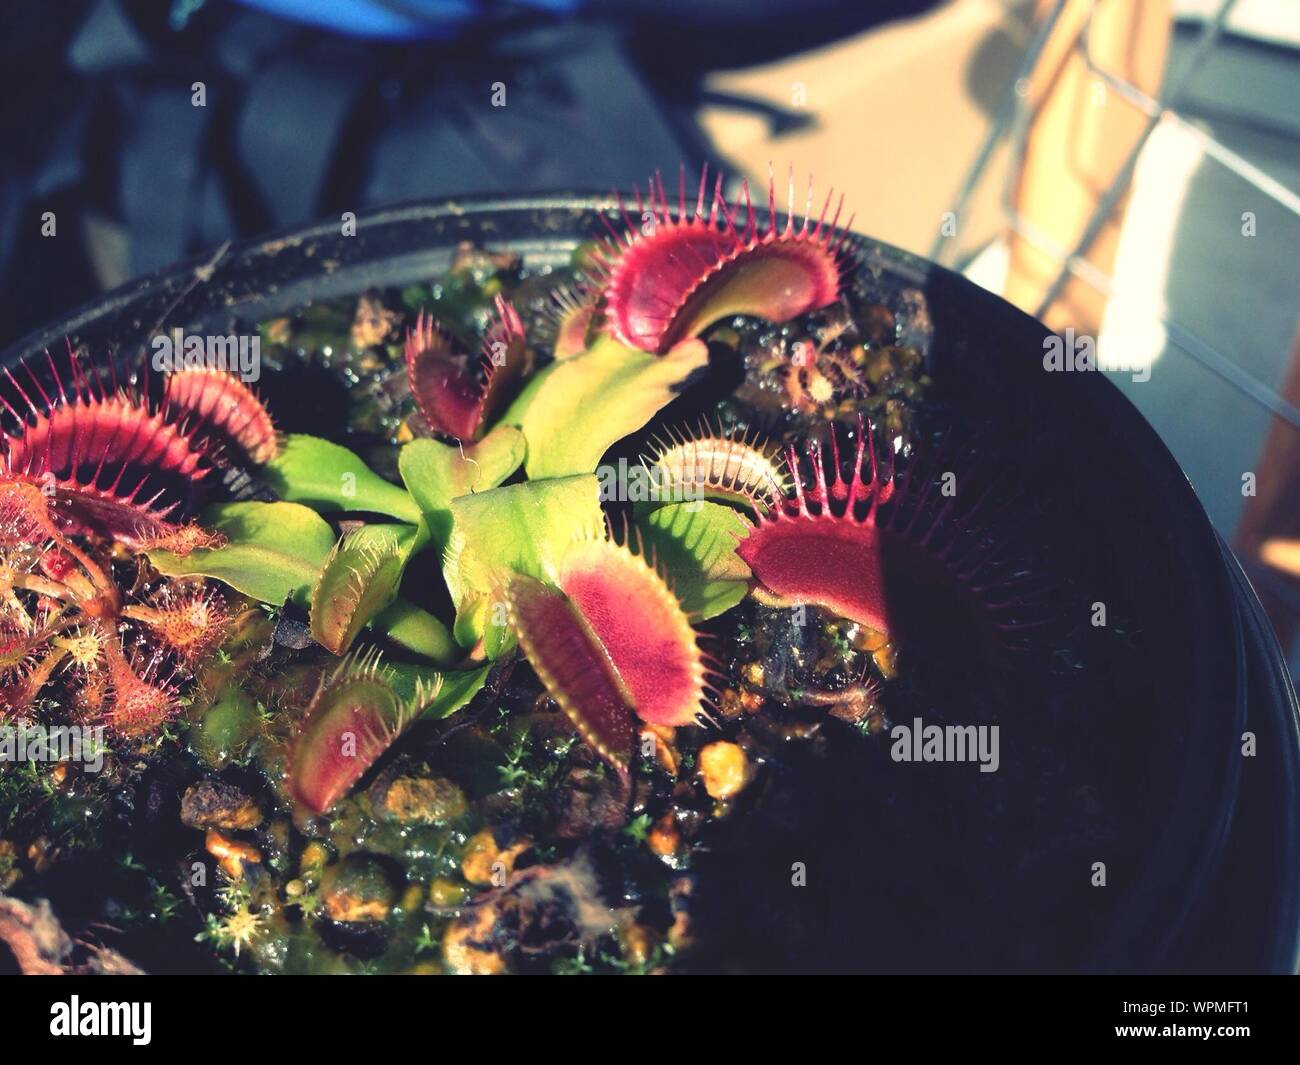 Elevated View Of Venus Flytrap Stock Photo